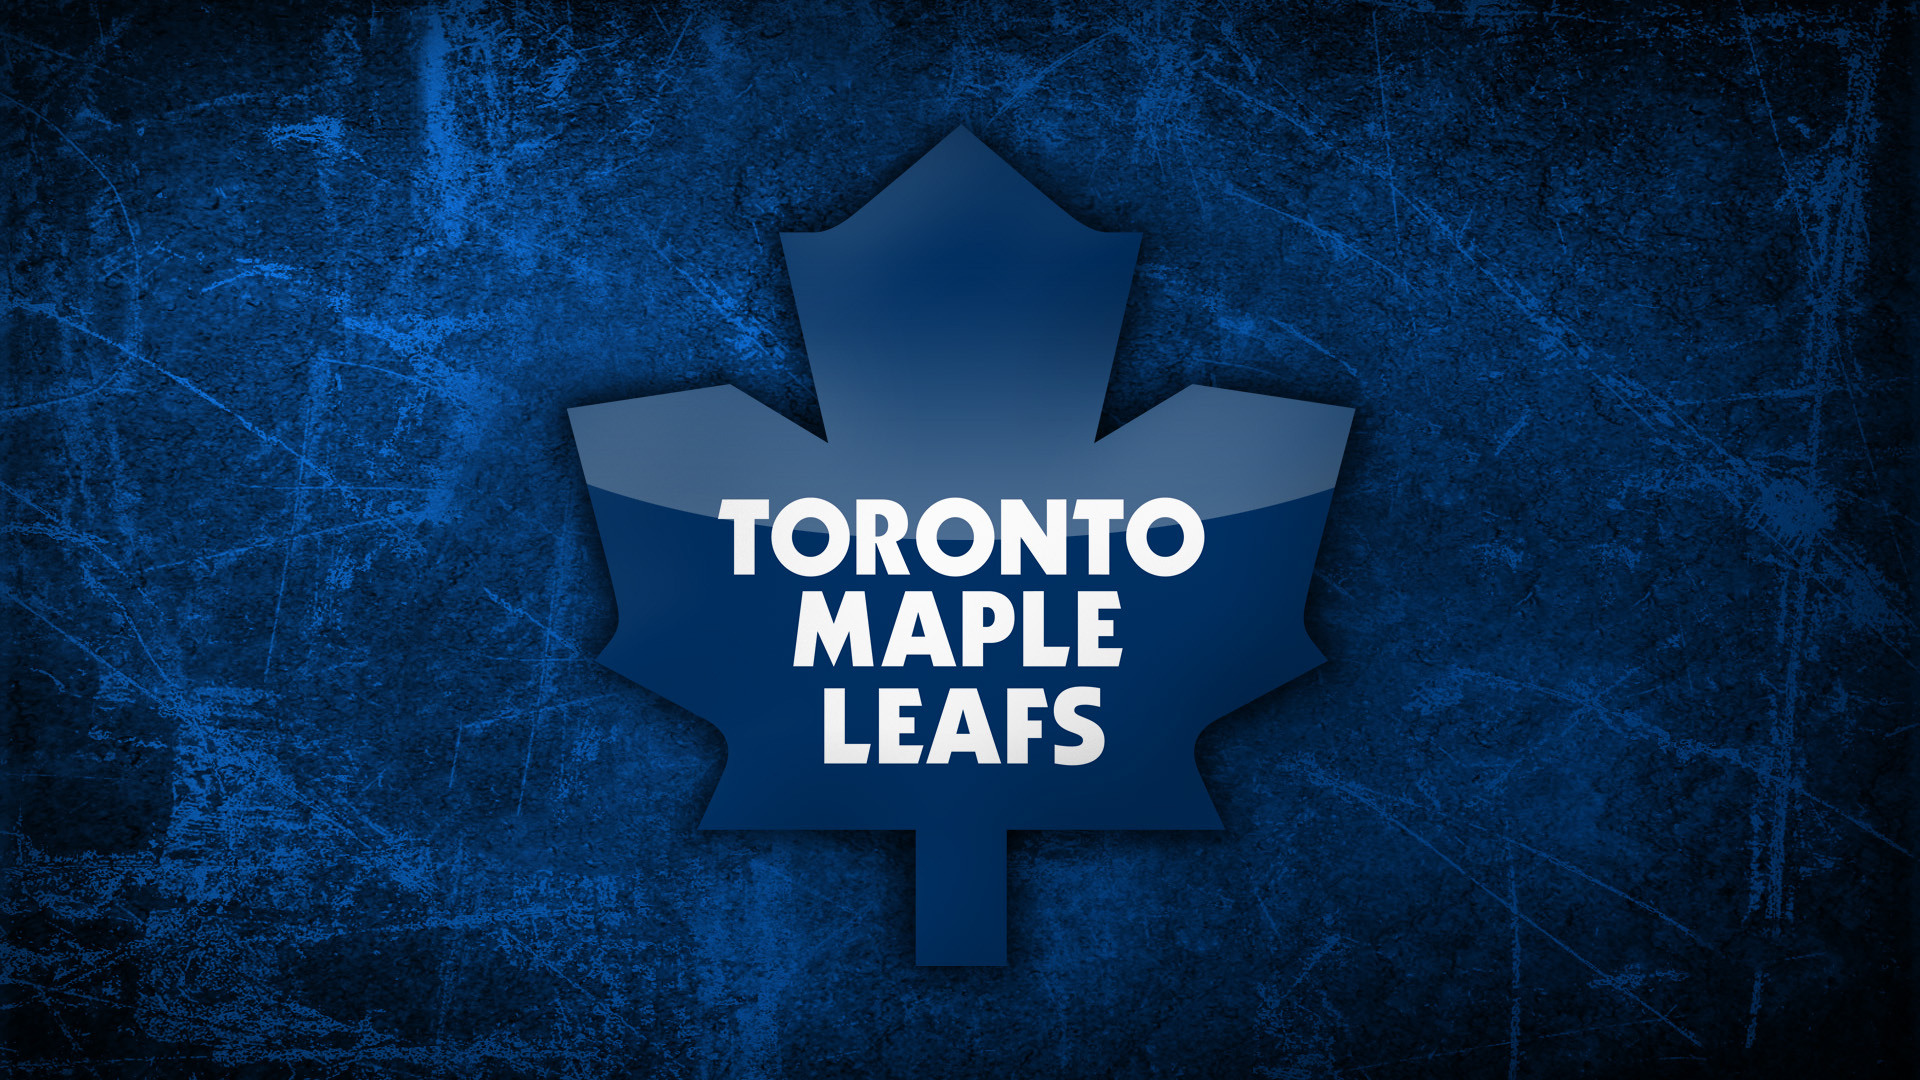 Toronto-maple-leafs-0 NHL Cool Wallpapers 1920-1200